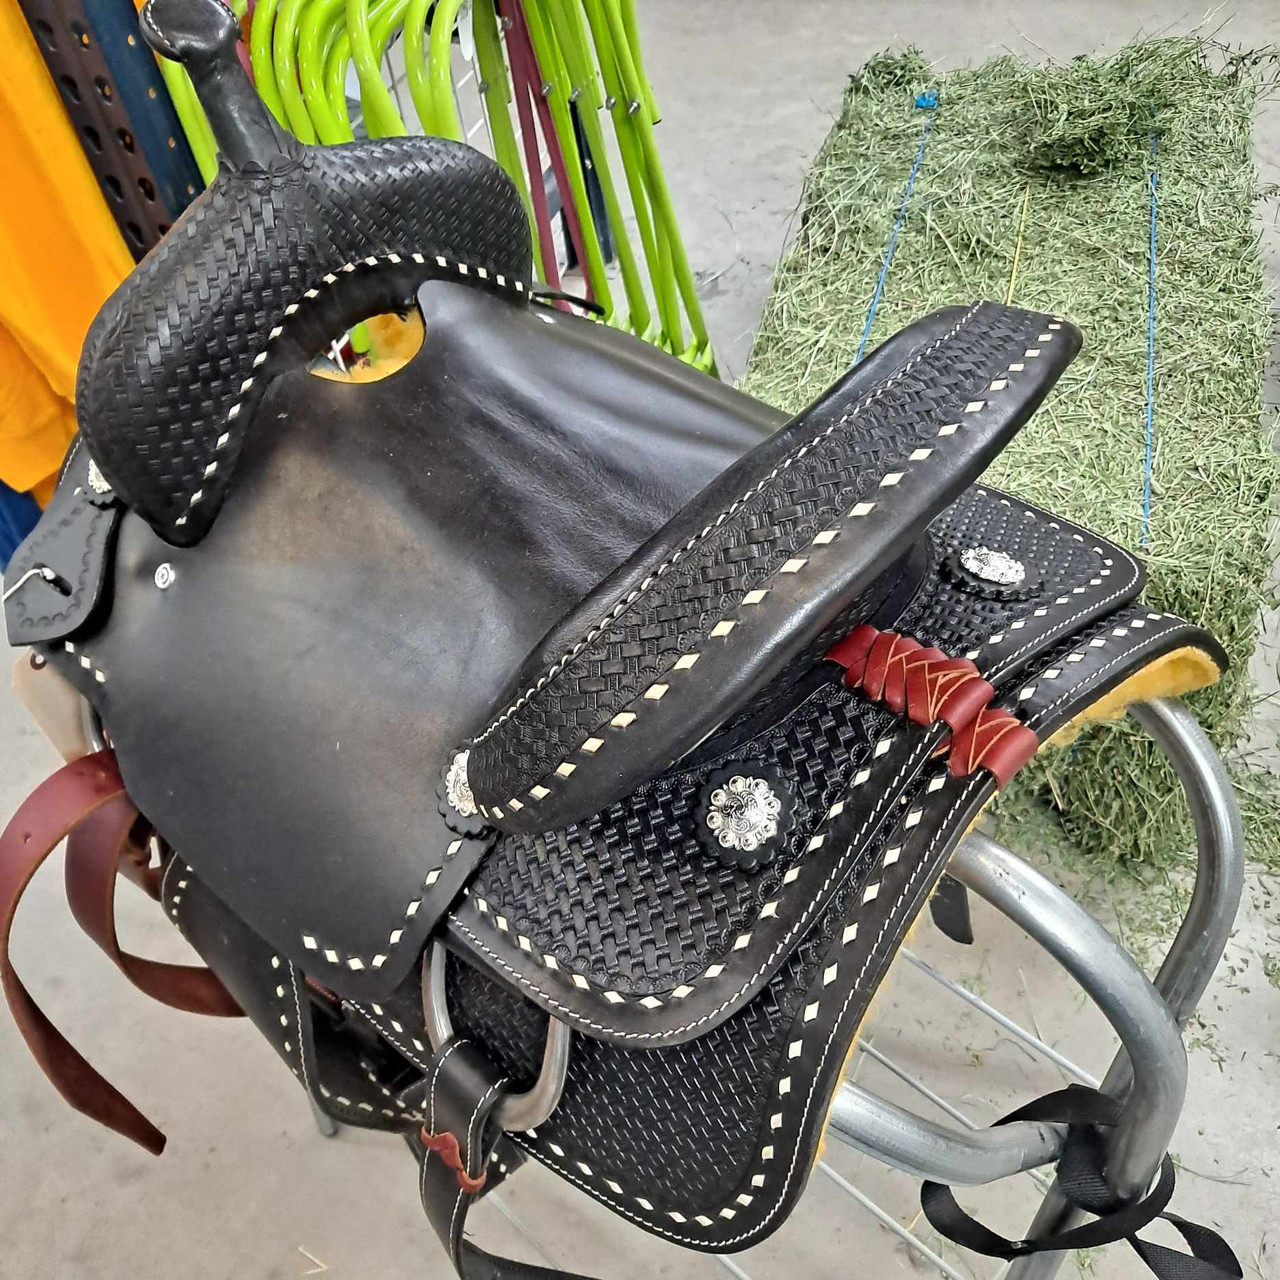 New Youth Saddle by Import with 13 inch seat. S1700